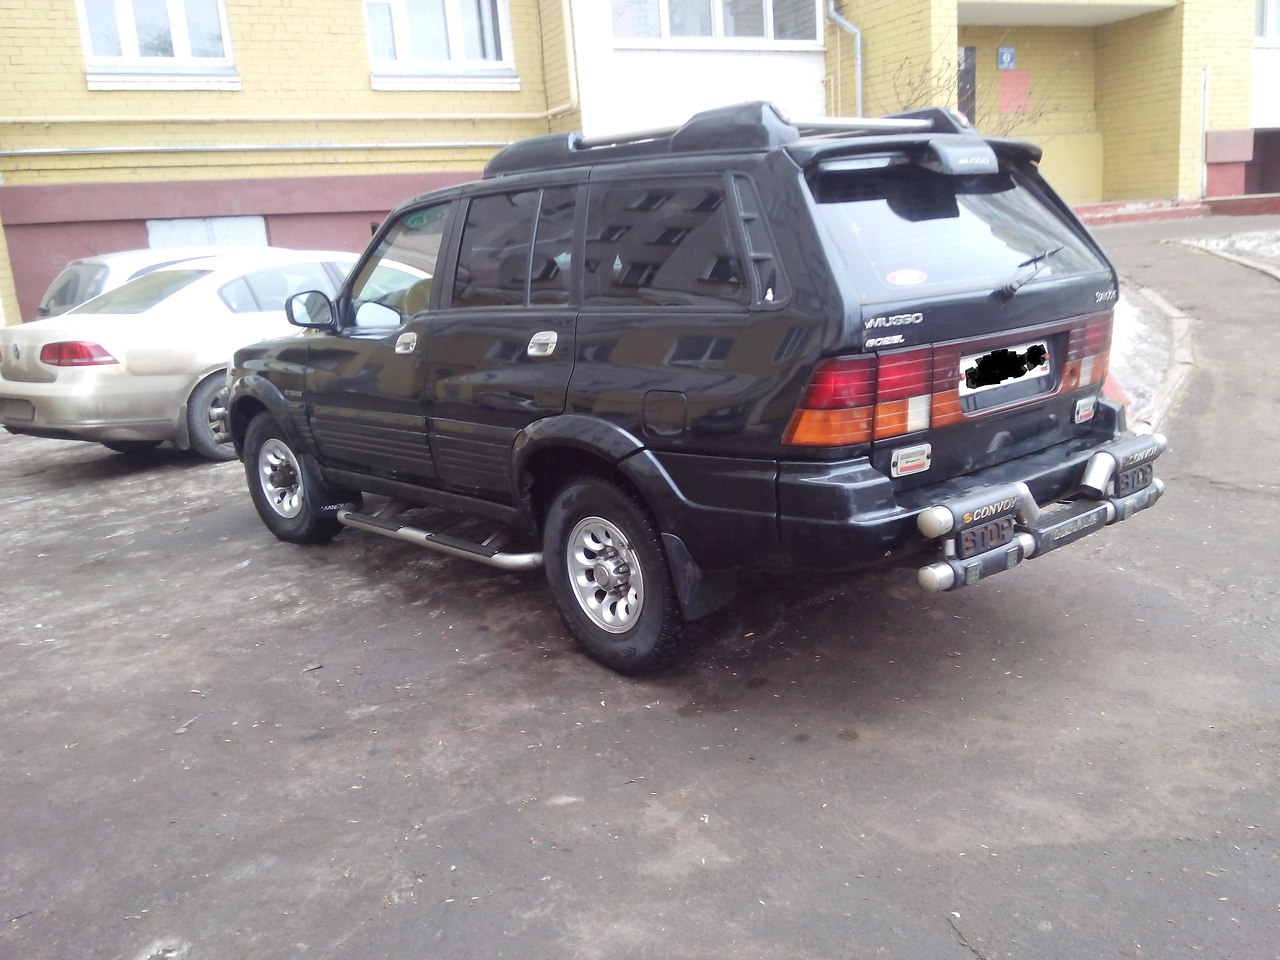 Купить б у муссо. SSANGYONG Musso 1. SSANGYONG Musso 2. SSANGYONG Musso 1995 Раптор. SSANGYONG Musso 2.9 at, 1995.